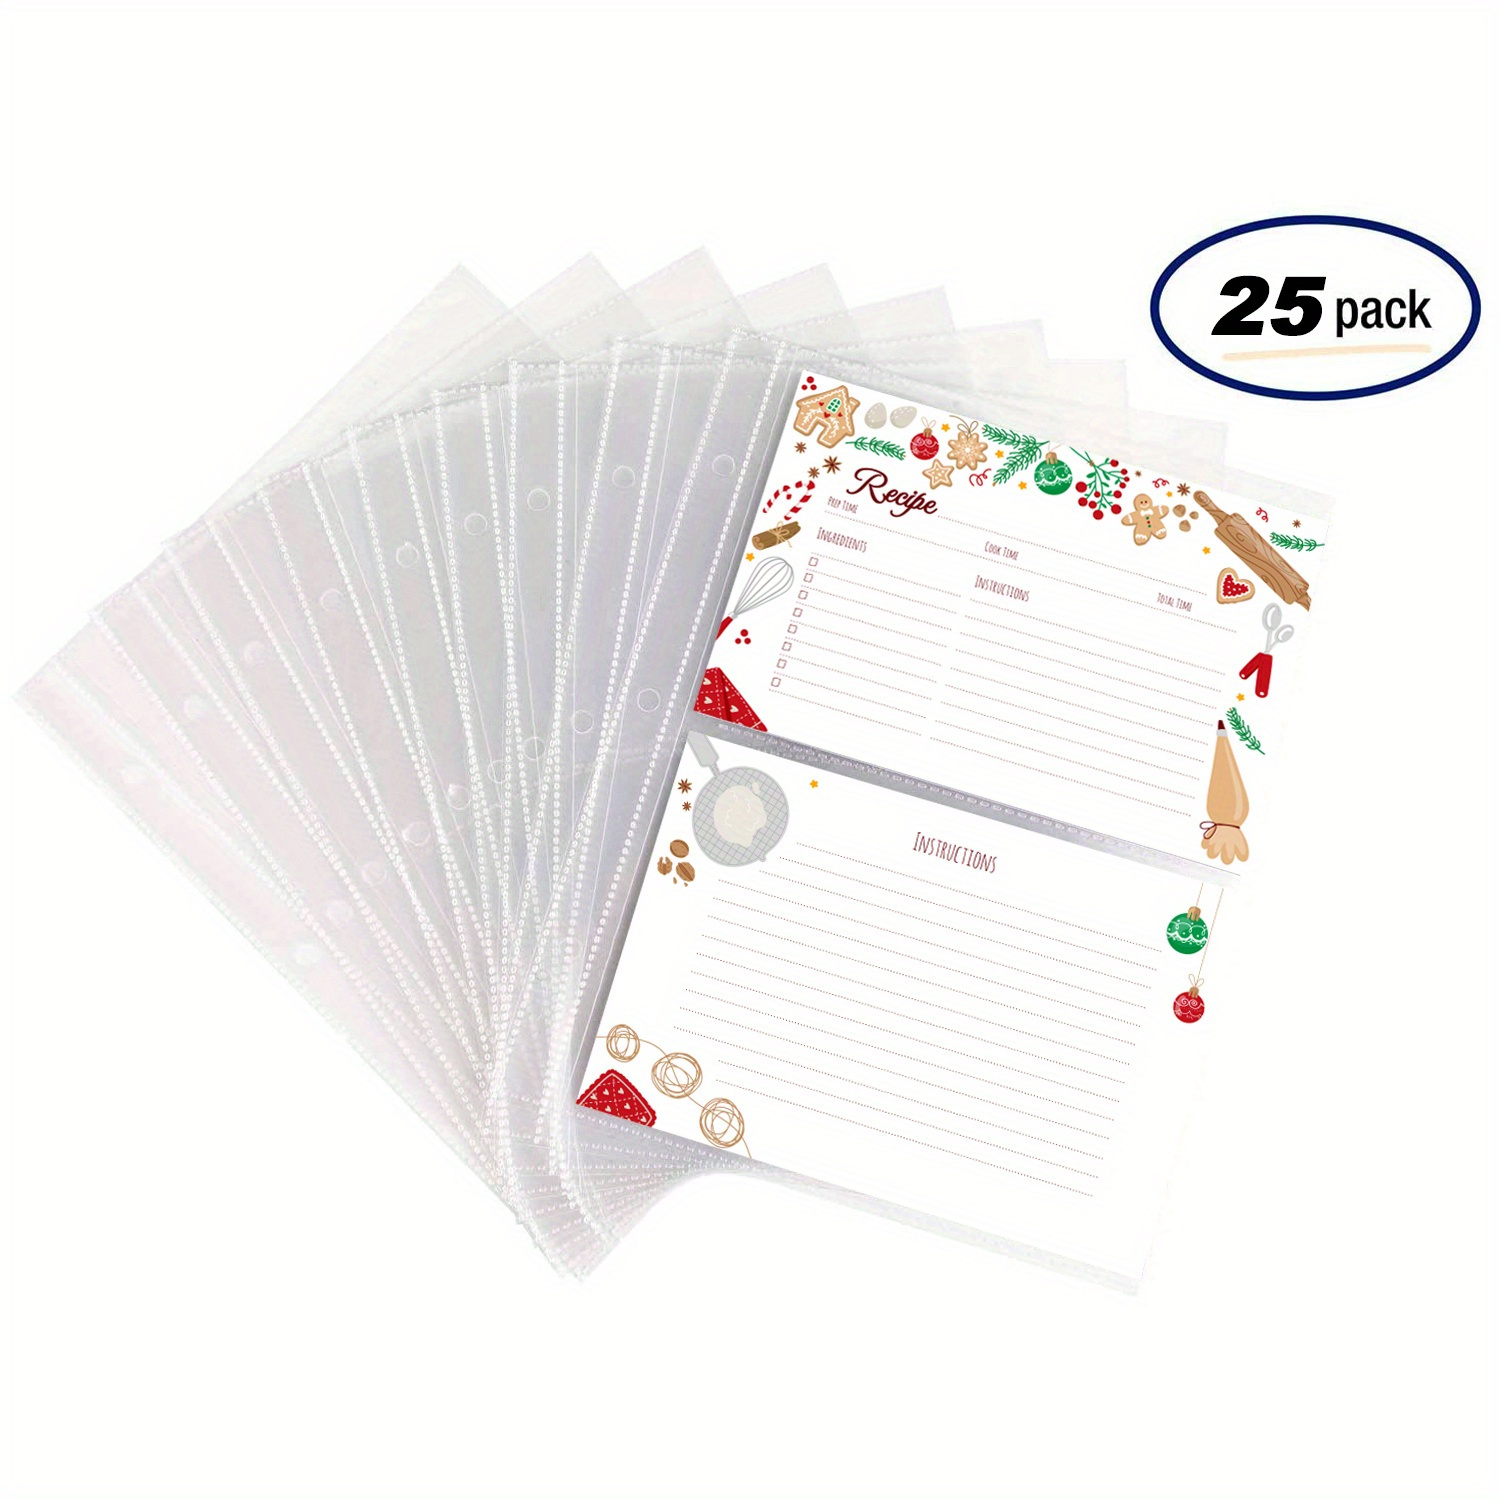 4 x 6 Sheet Protectors for 4x6 recipe cards